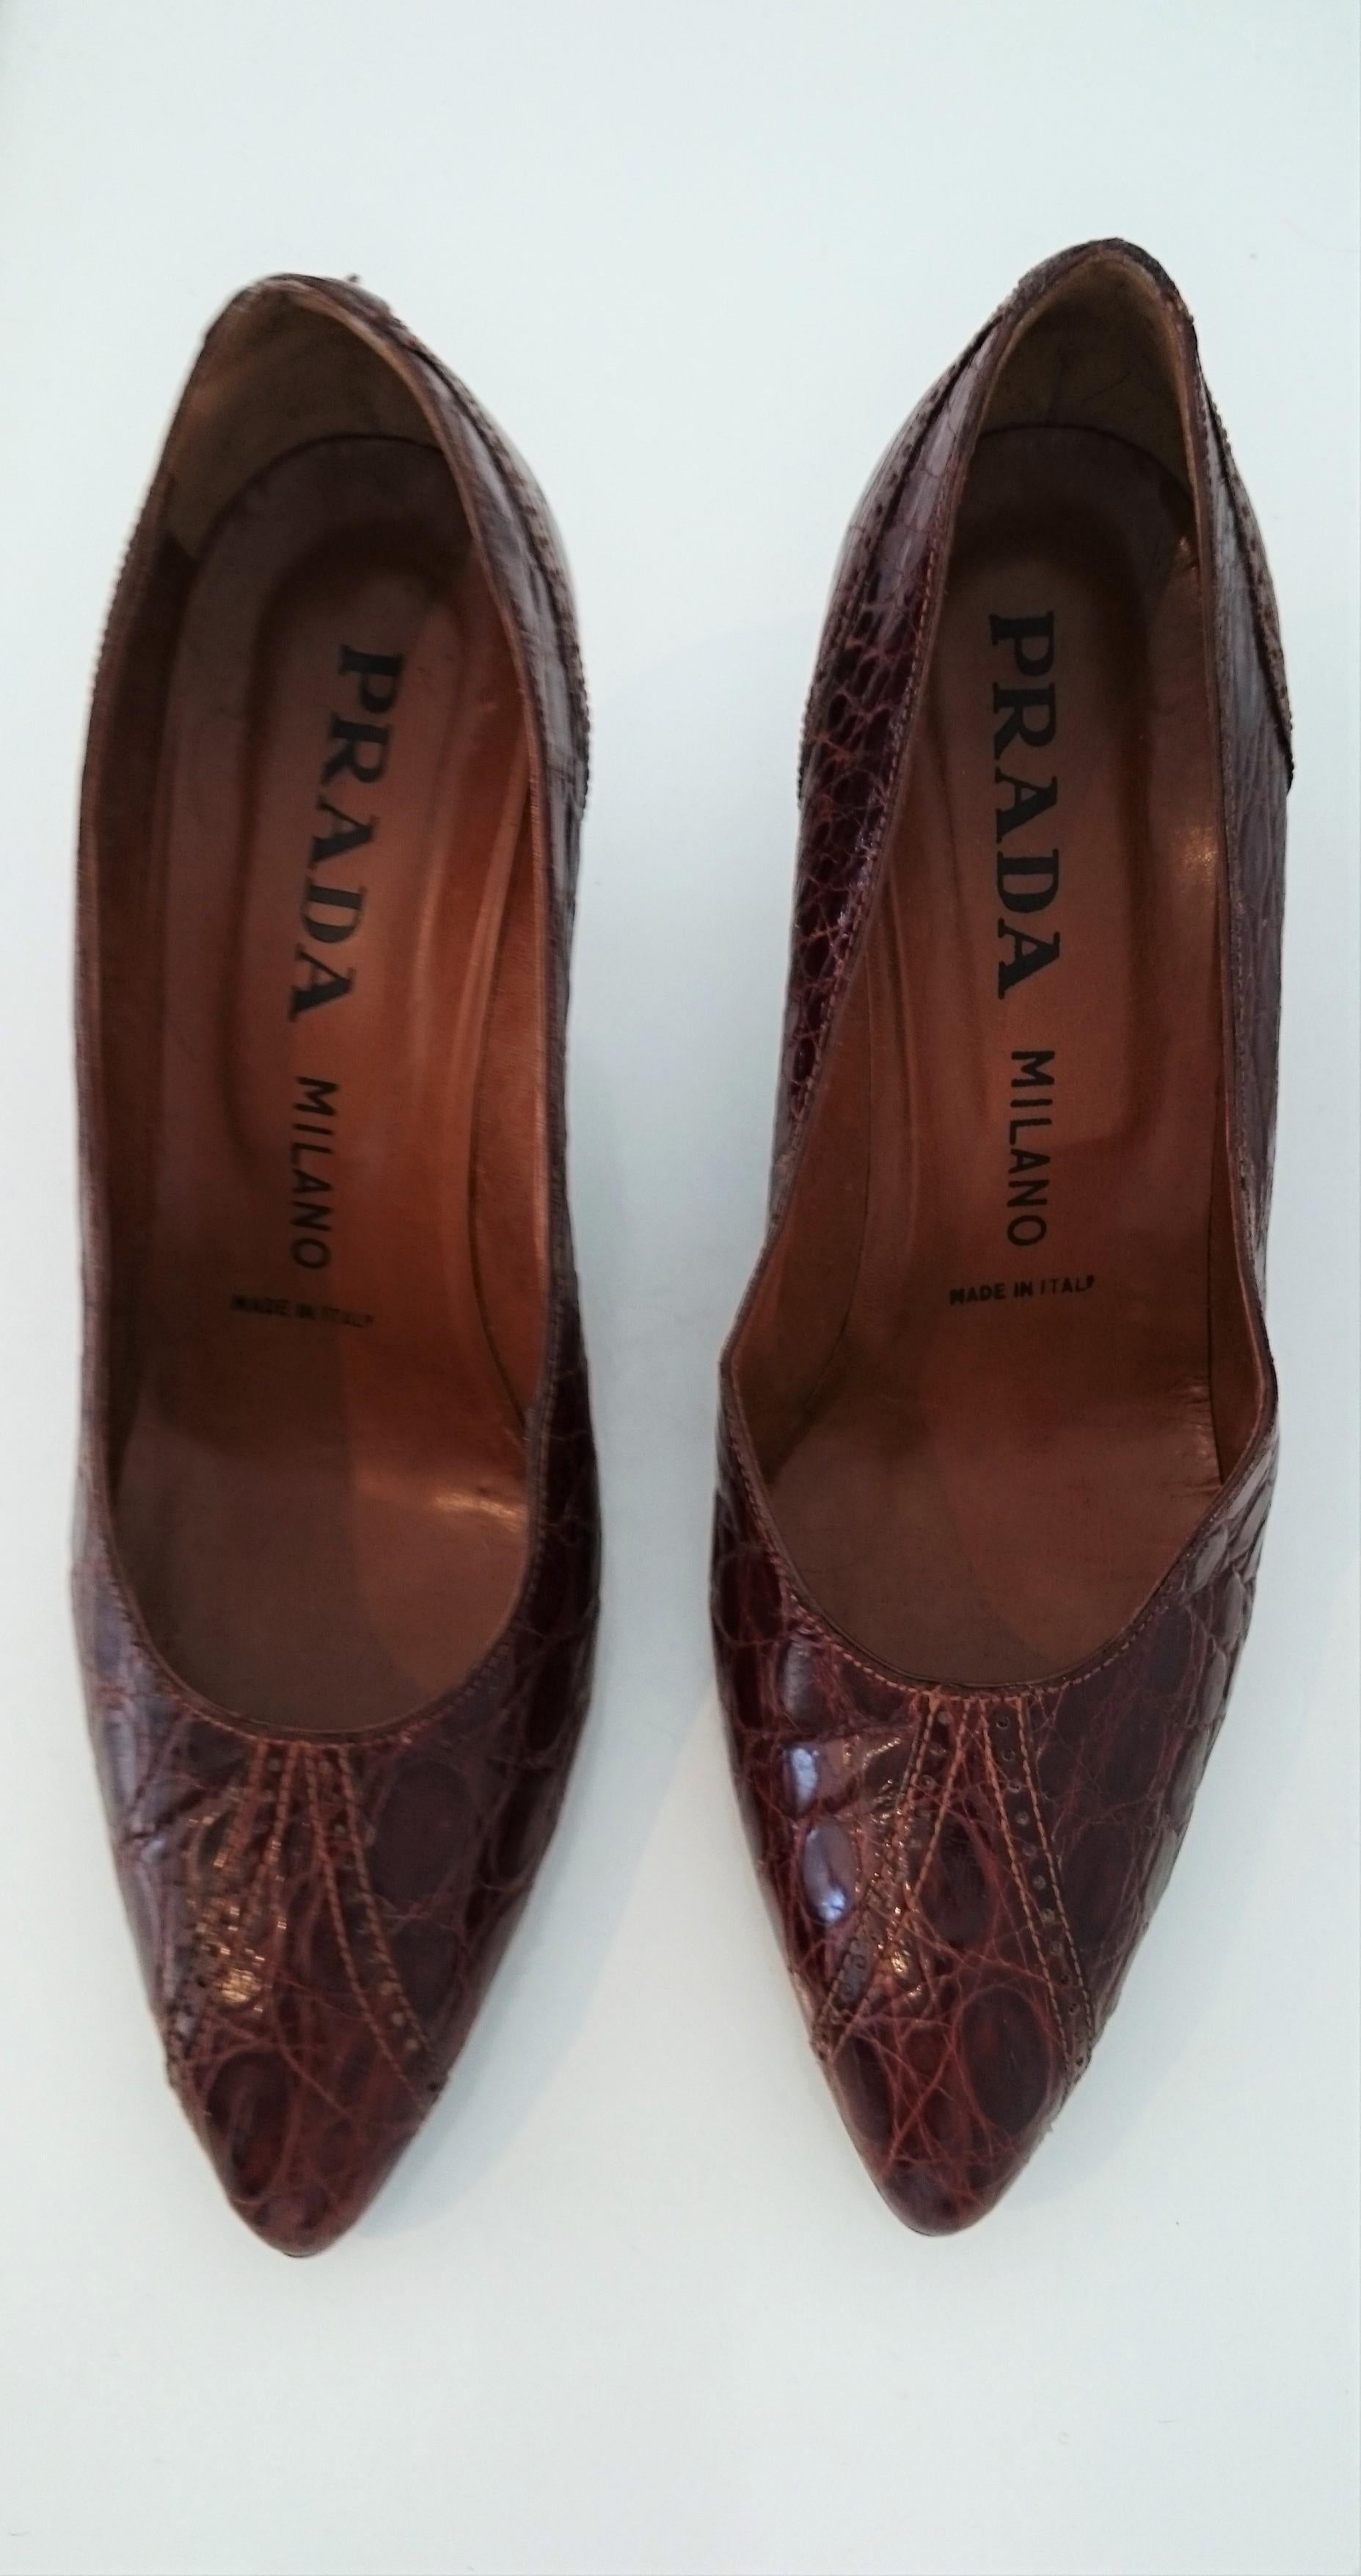 Prada Heels in Wild Crocodile Leather with Wood Sole. Size 39.5 In Excellent Condition For Sale In Somo (Santander), ES